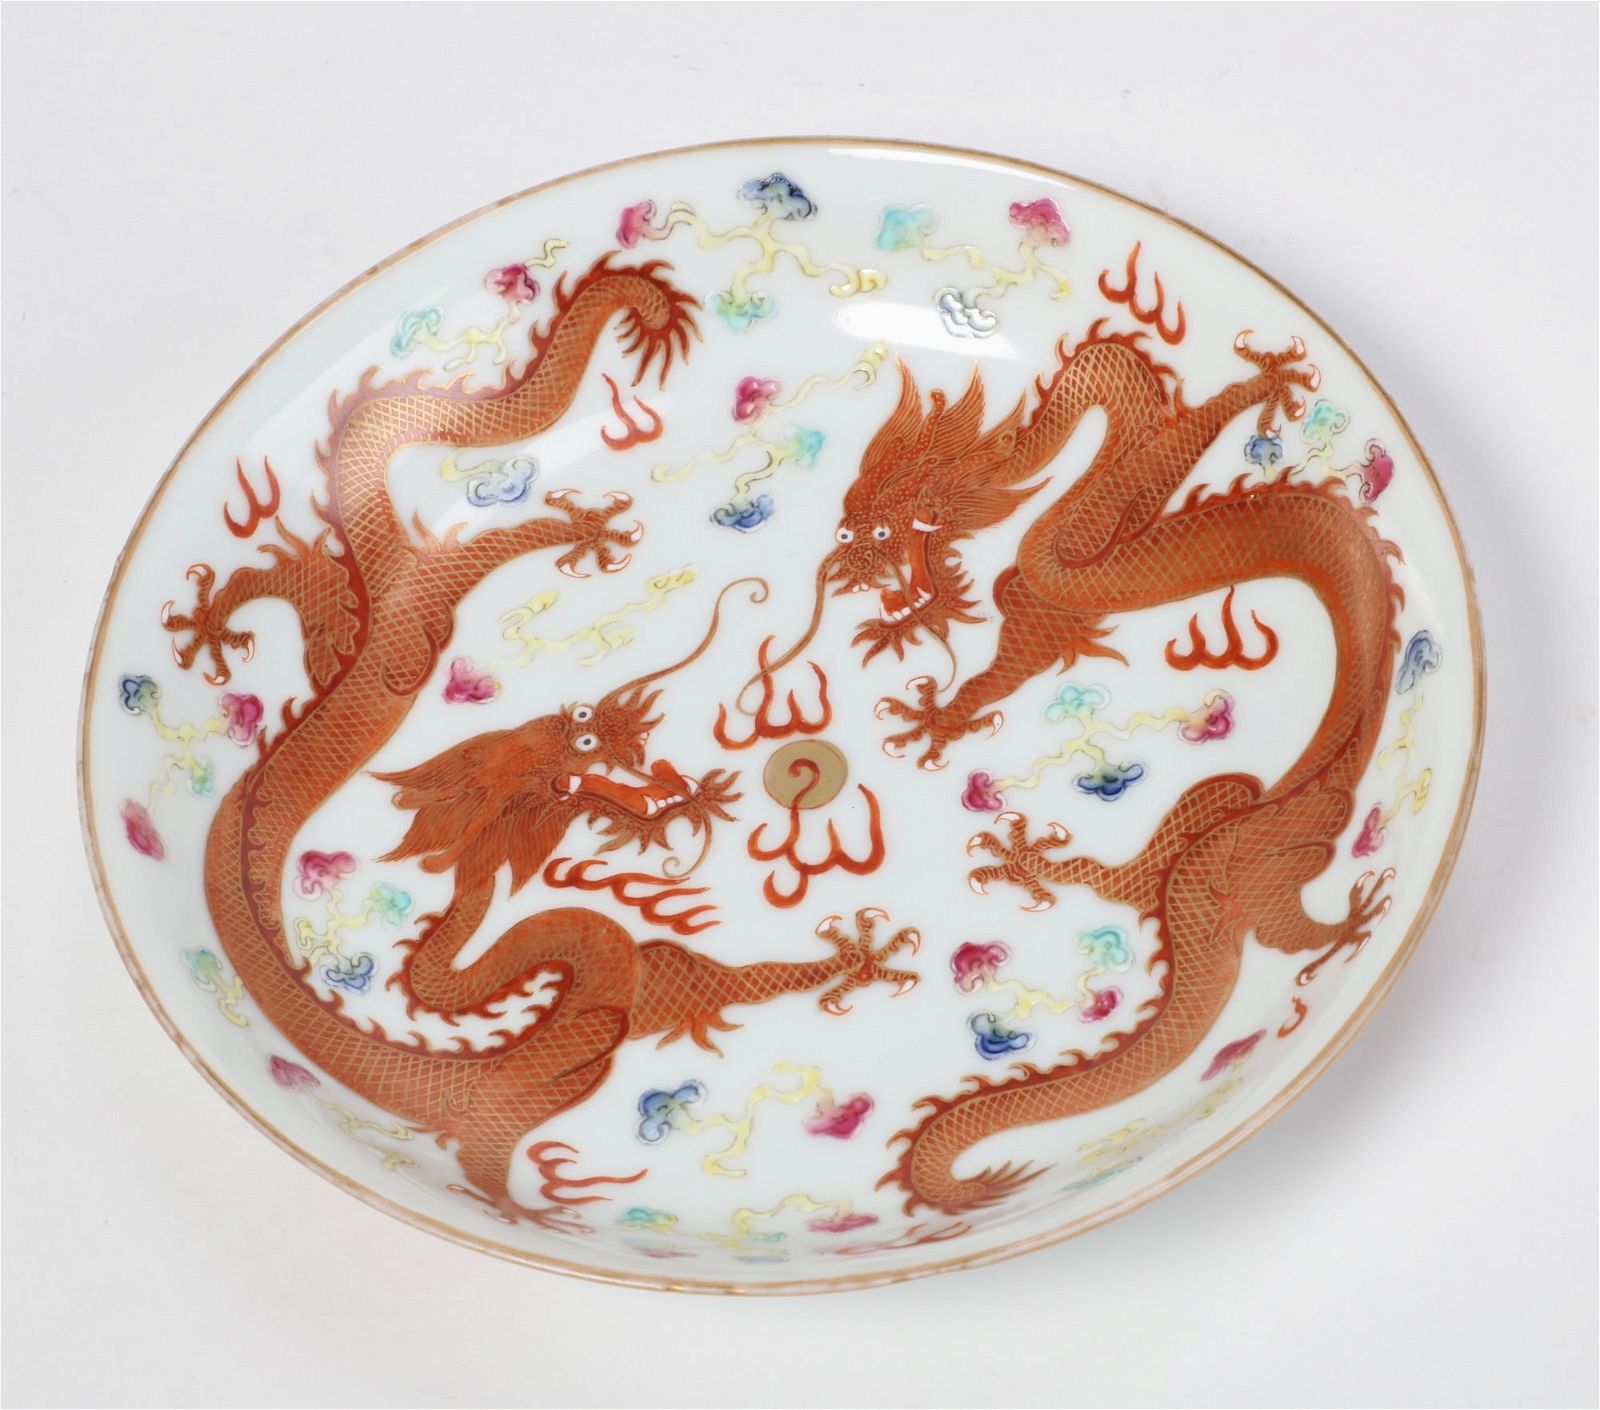 A CHINESE PORCELAIN DOUBLE DRAGON